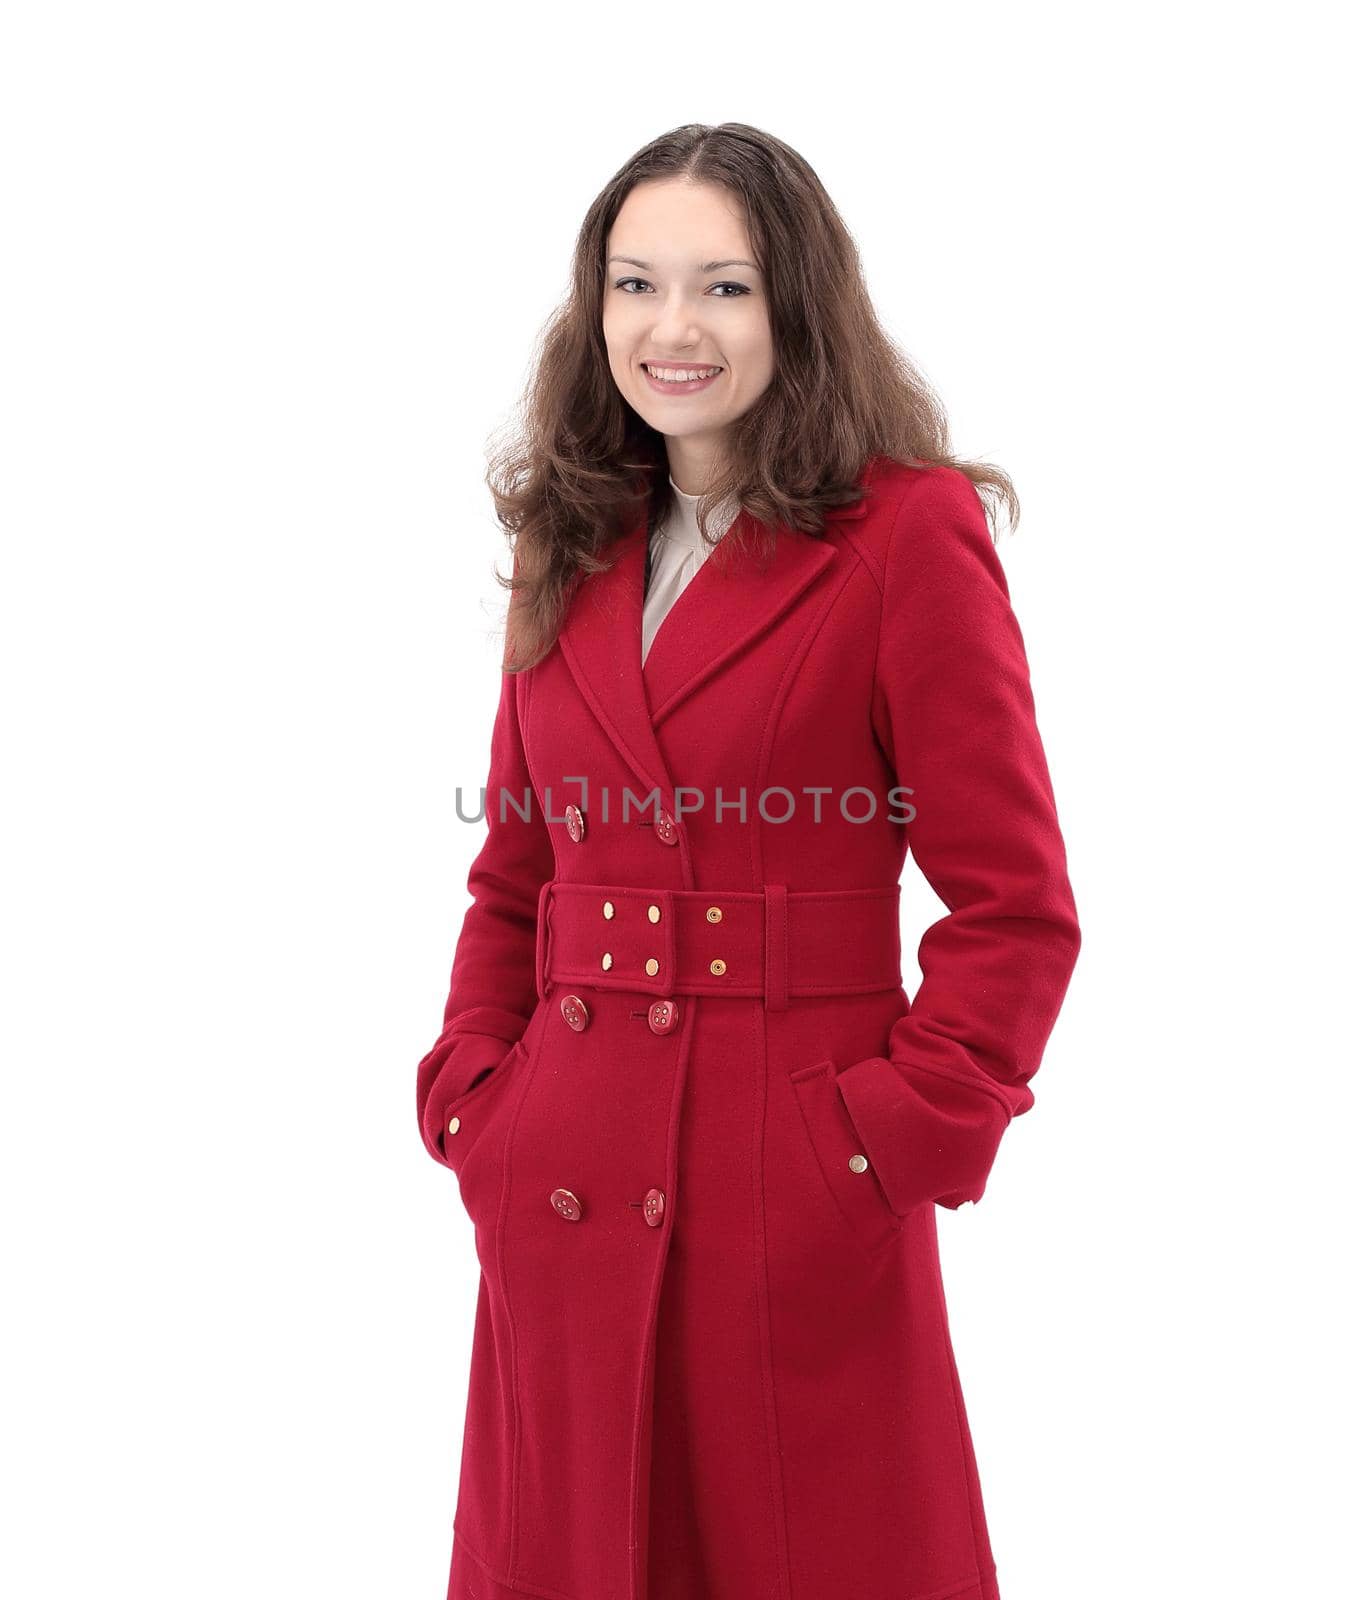 closeup.portrait of a smiling young woman in red coat. by SmartPhotoLab